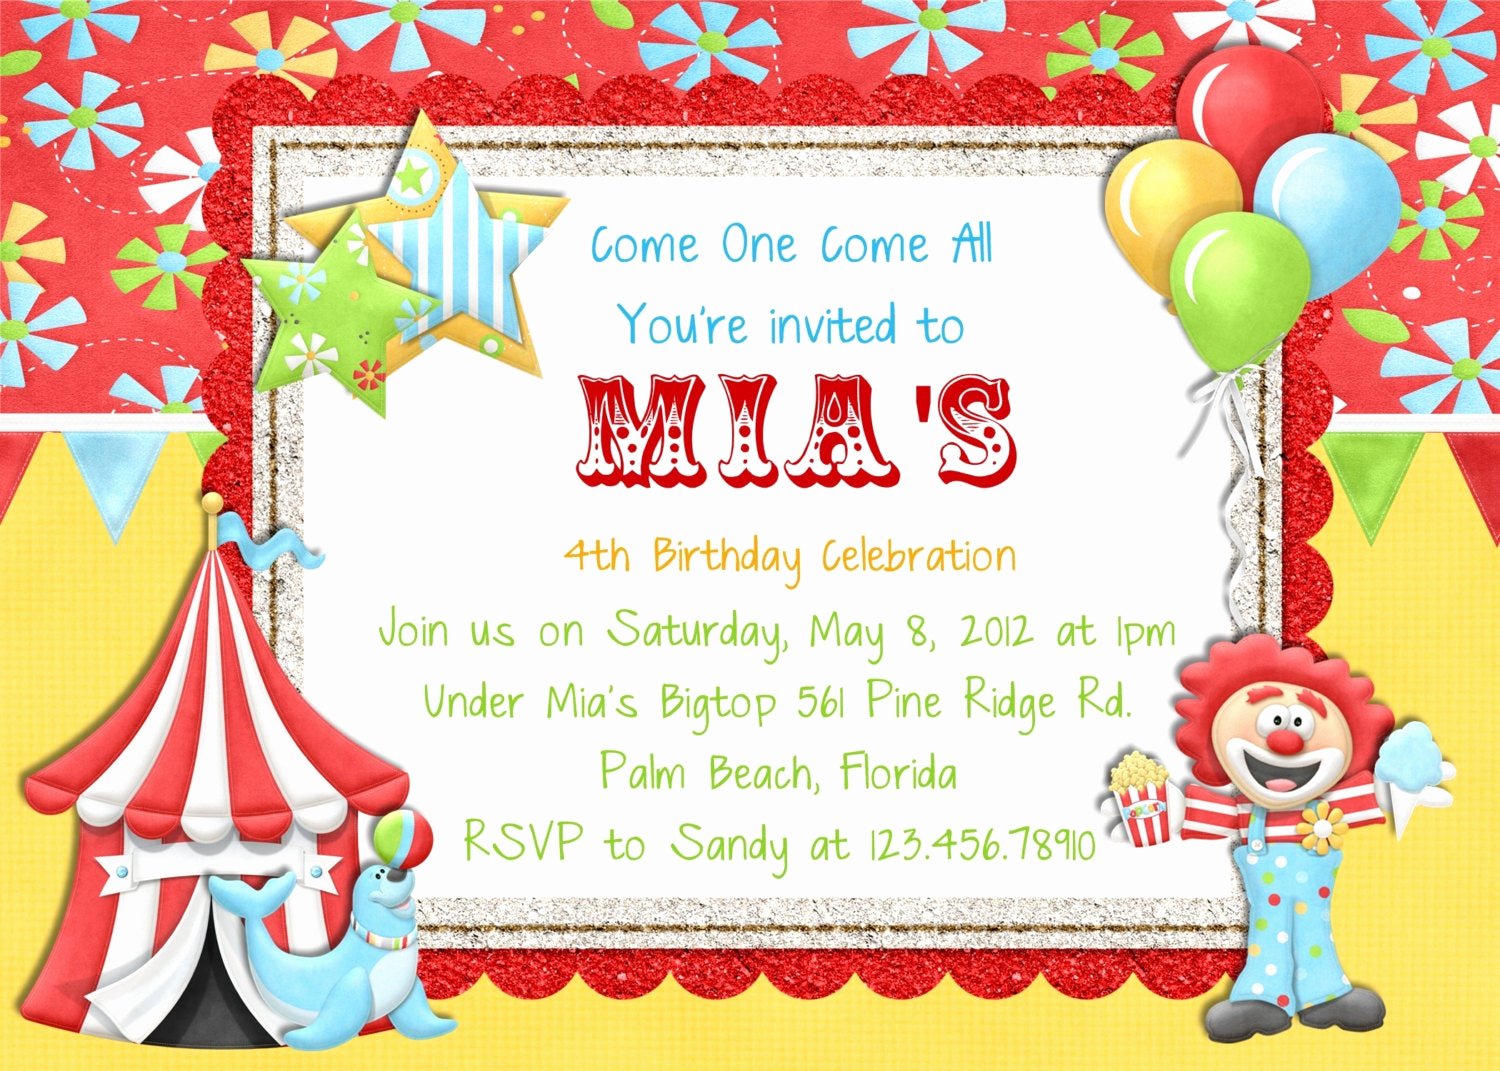 Carnival Birthday Party Invitations Inspirational Circus Carnival Birthday Invitation Printable by 3peasprints